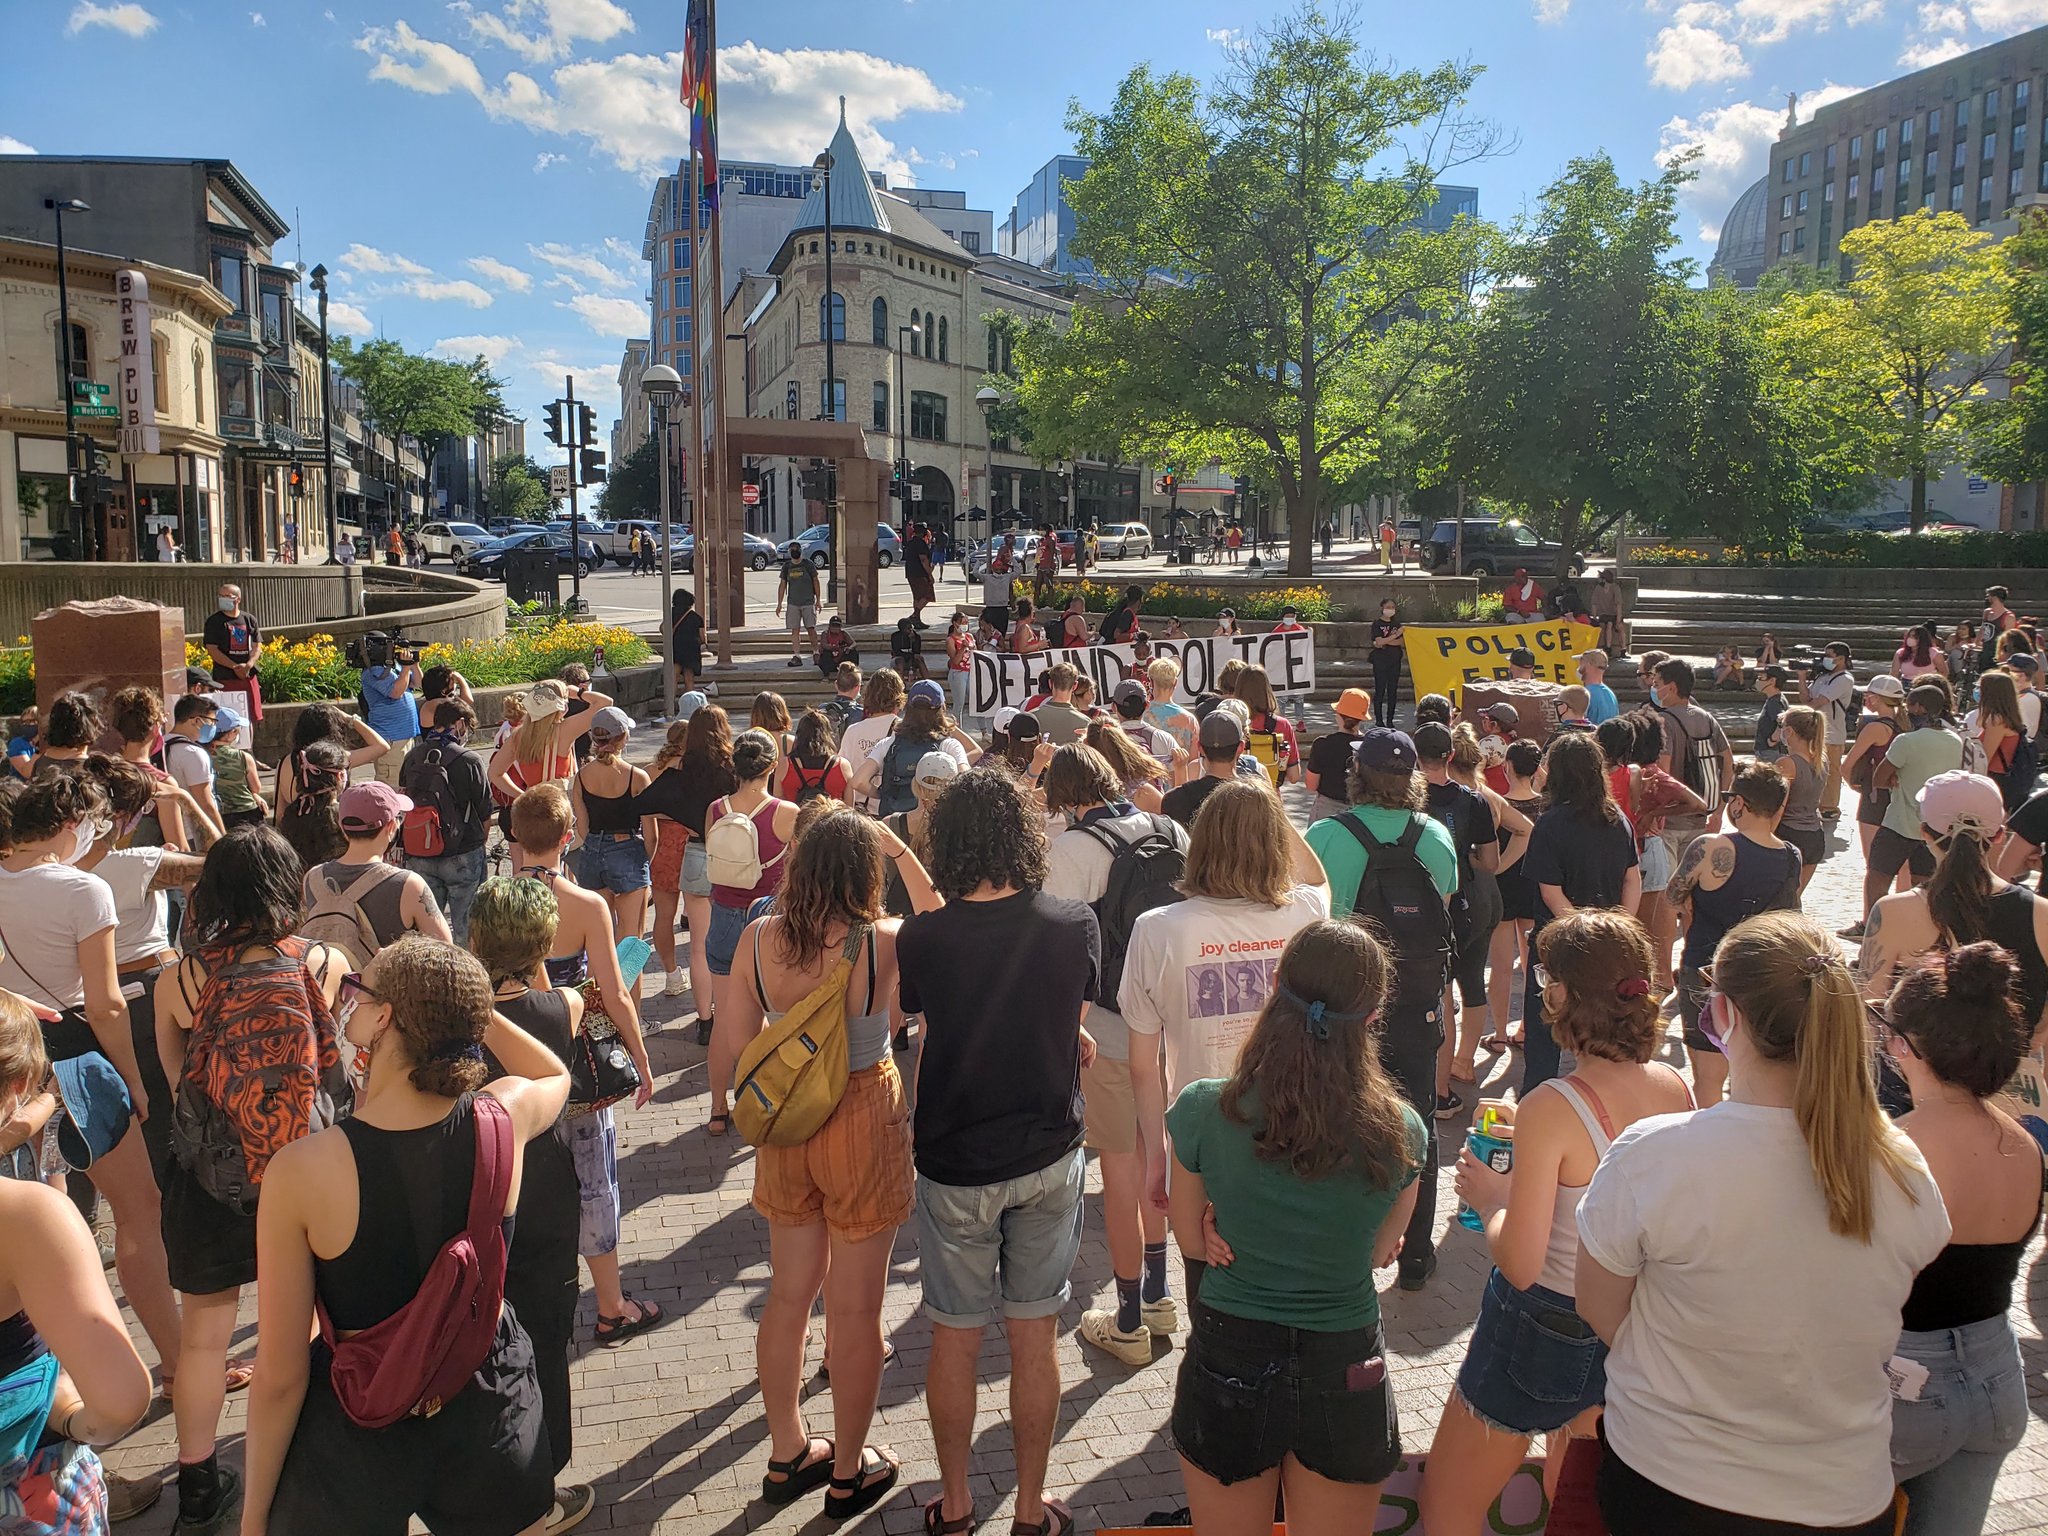 Hundreds gathered near the state Capitol in Madison and marched to push for the removal of police officers from schools on Thursday evening, June 25, 2020.